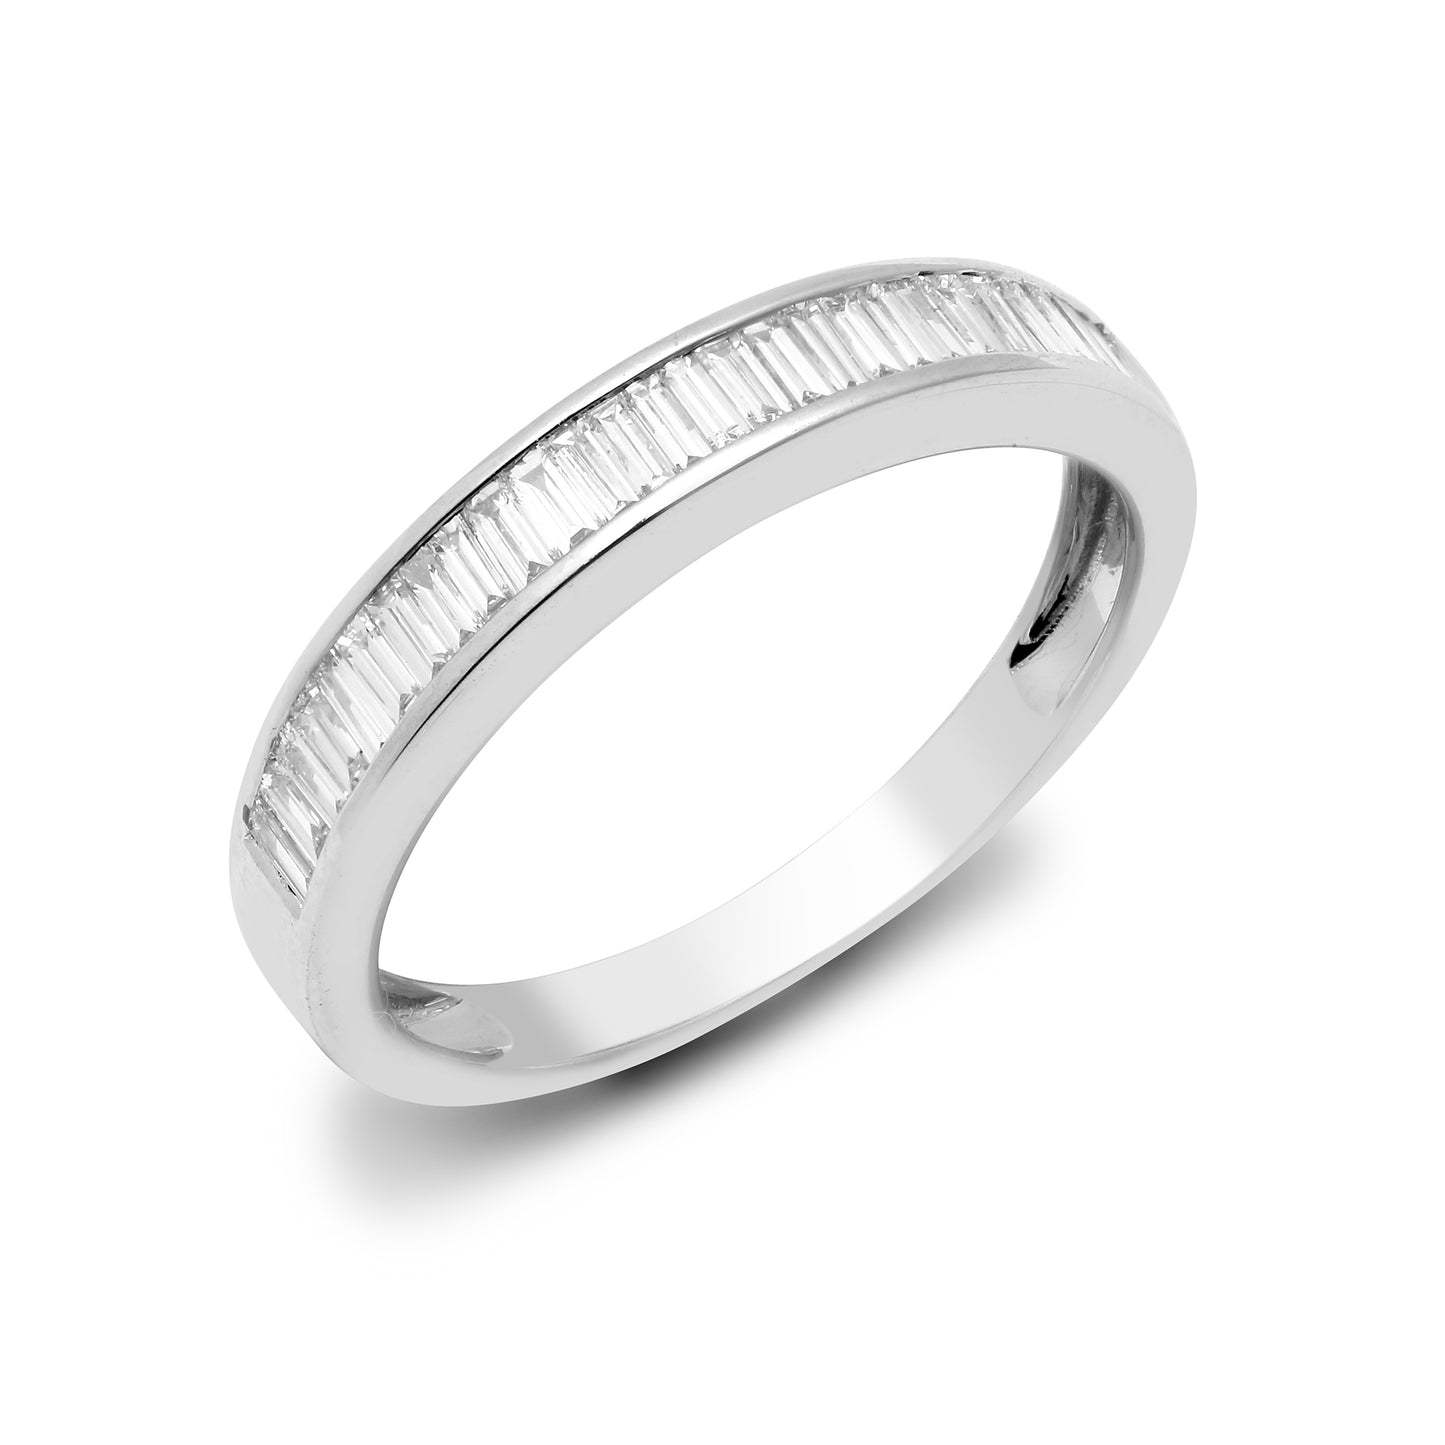 18ct White Gold  0.75ct Diamond Dainty Band Eternity Ring 4.5mm - 18R896-075